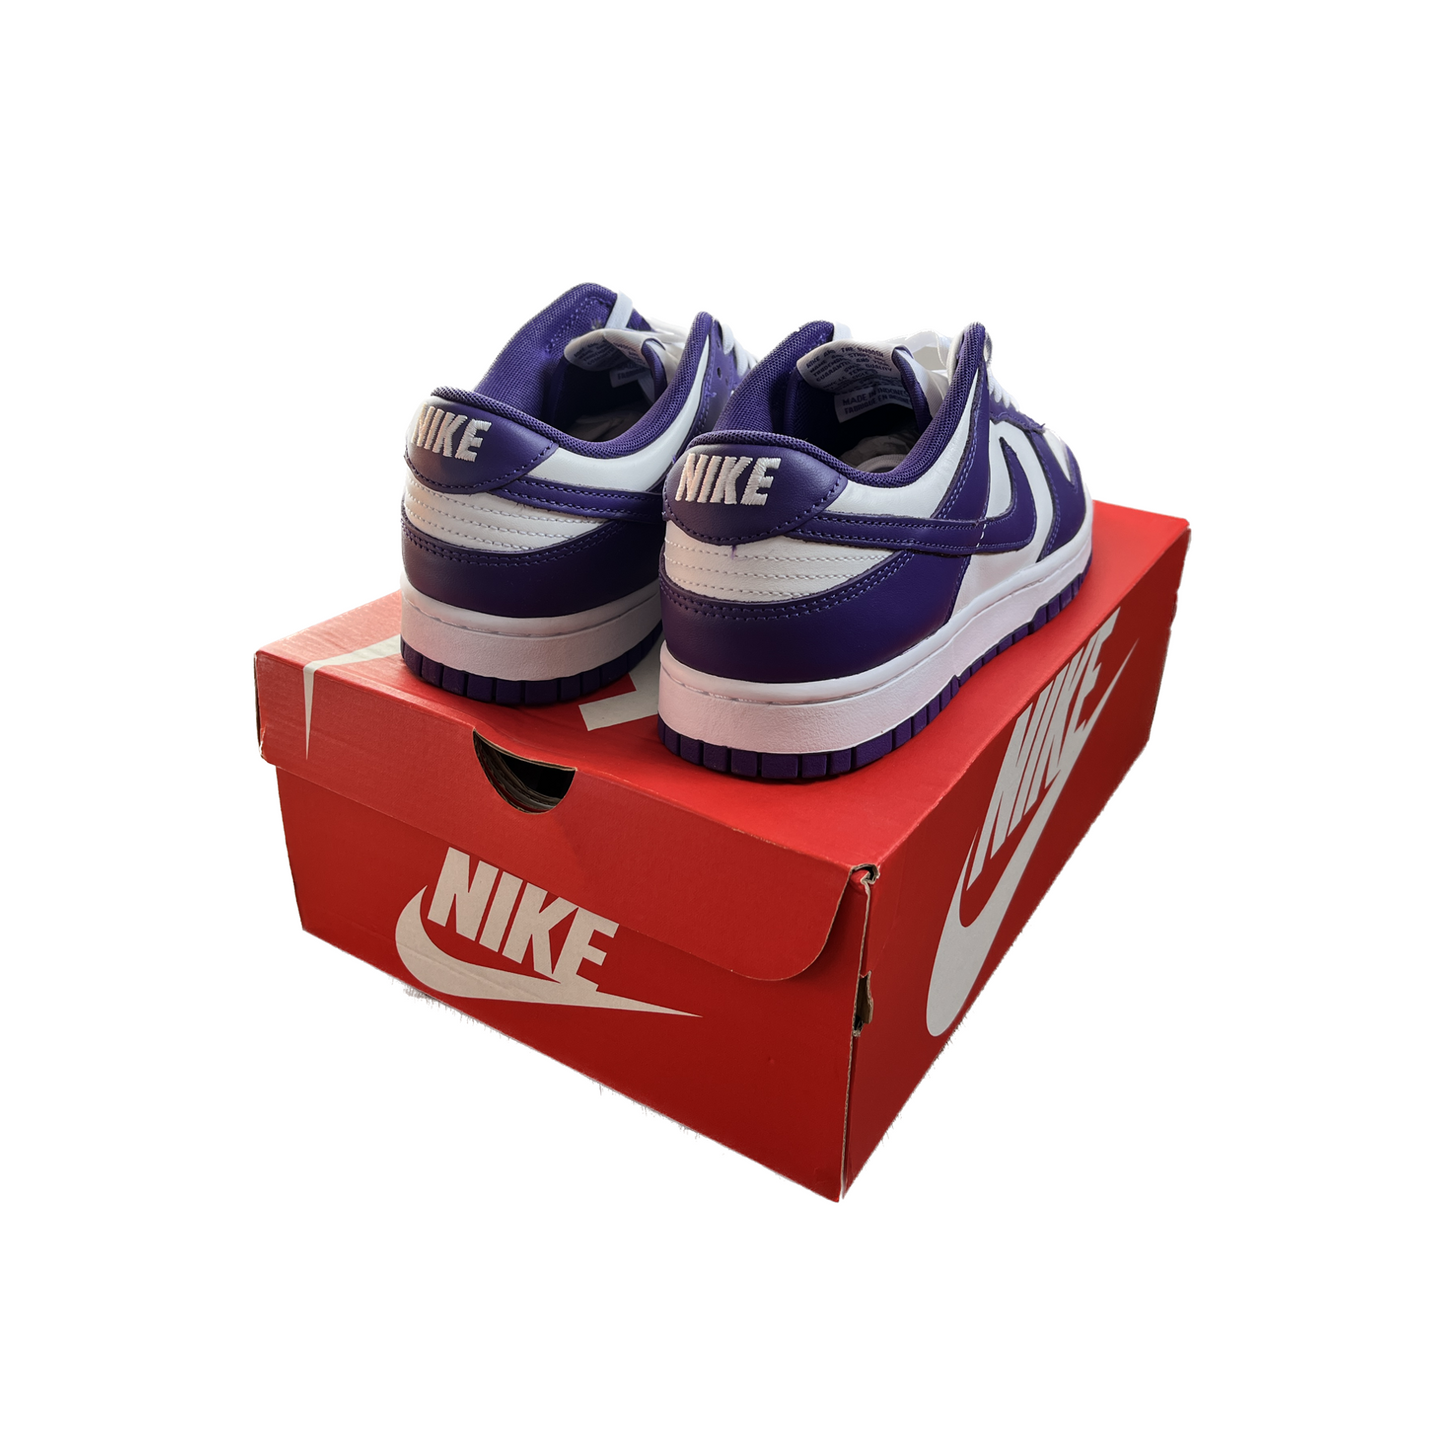 Nike Dunk Low Championship Court Purple - The Global Hype